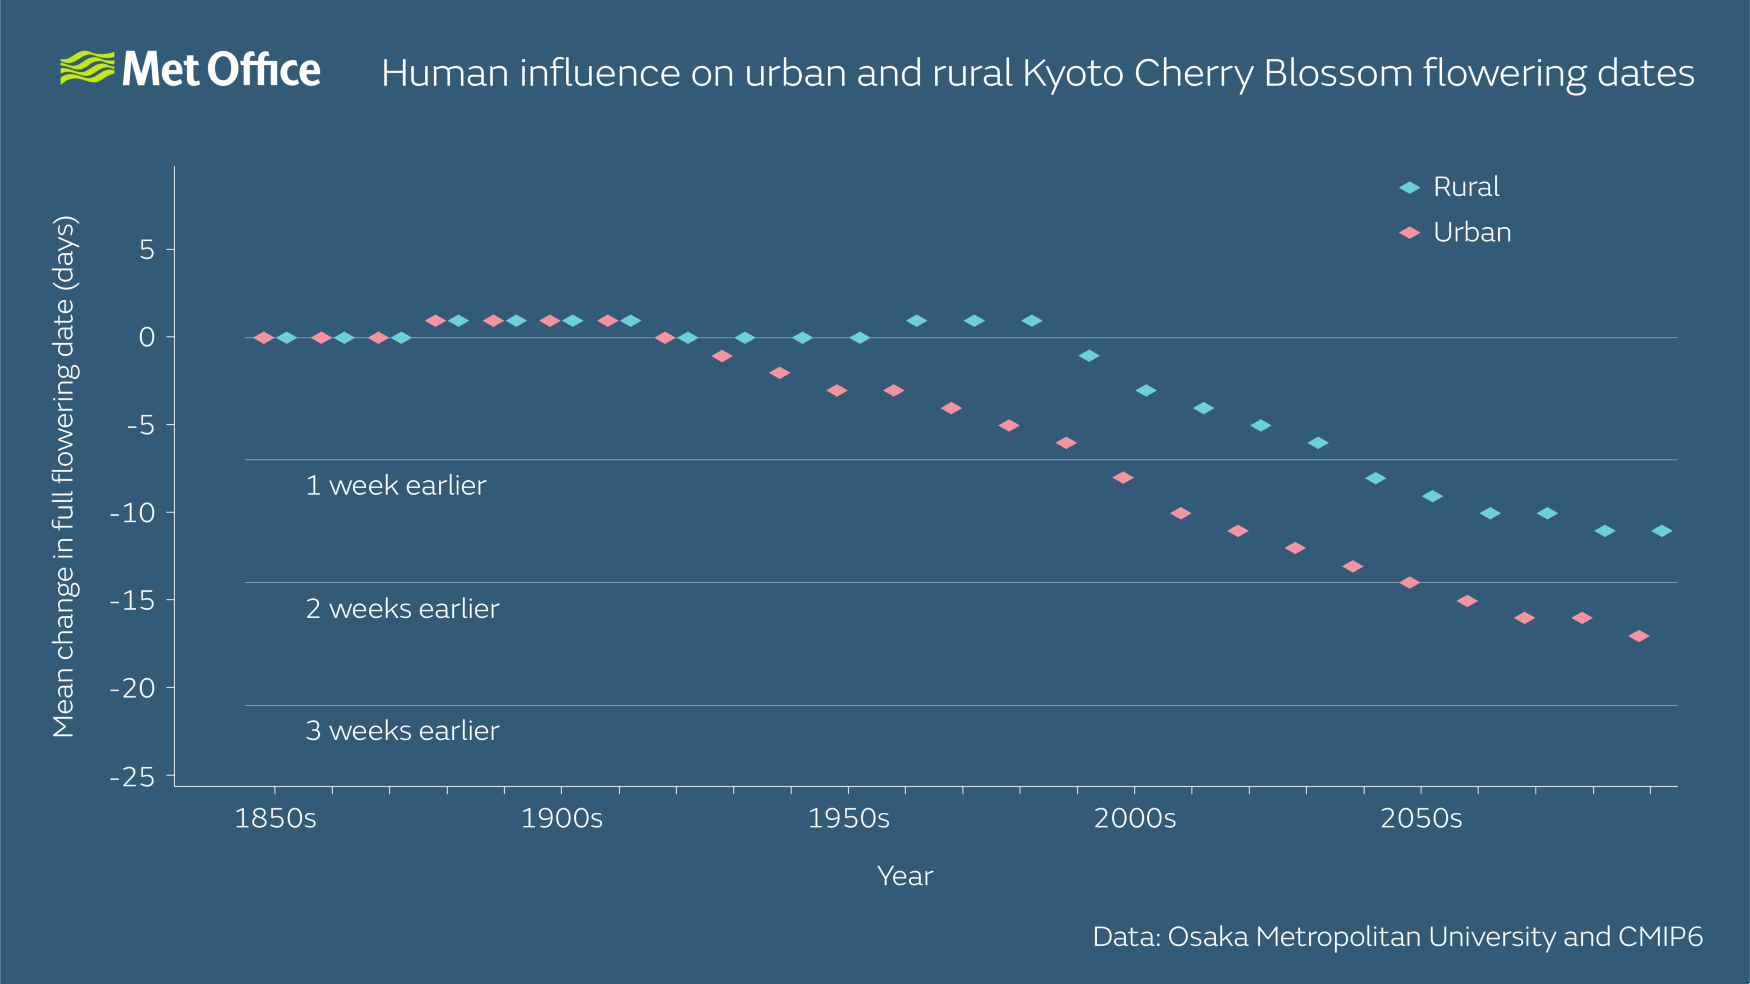 Graph showing cherry blossom flowering dates in urban and rural locations